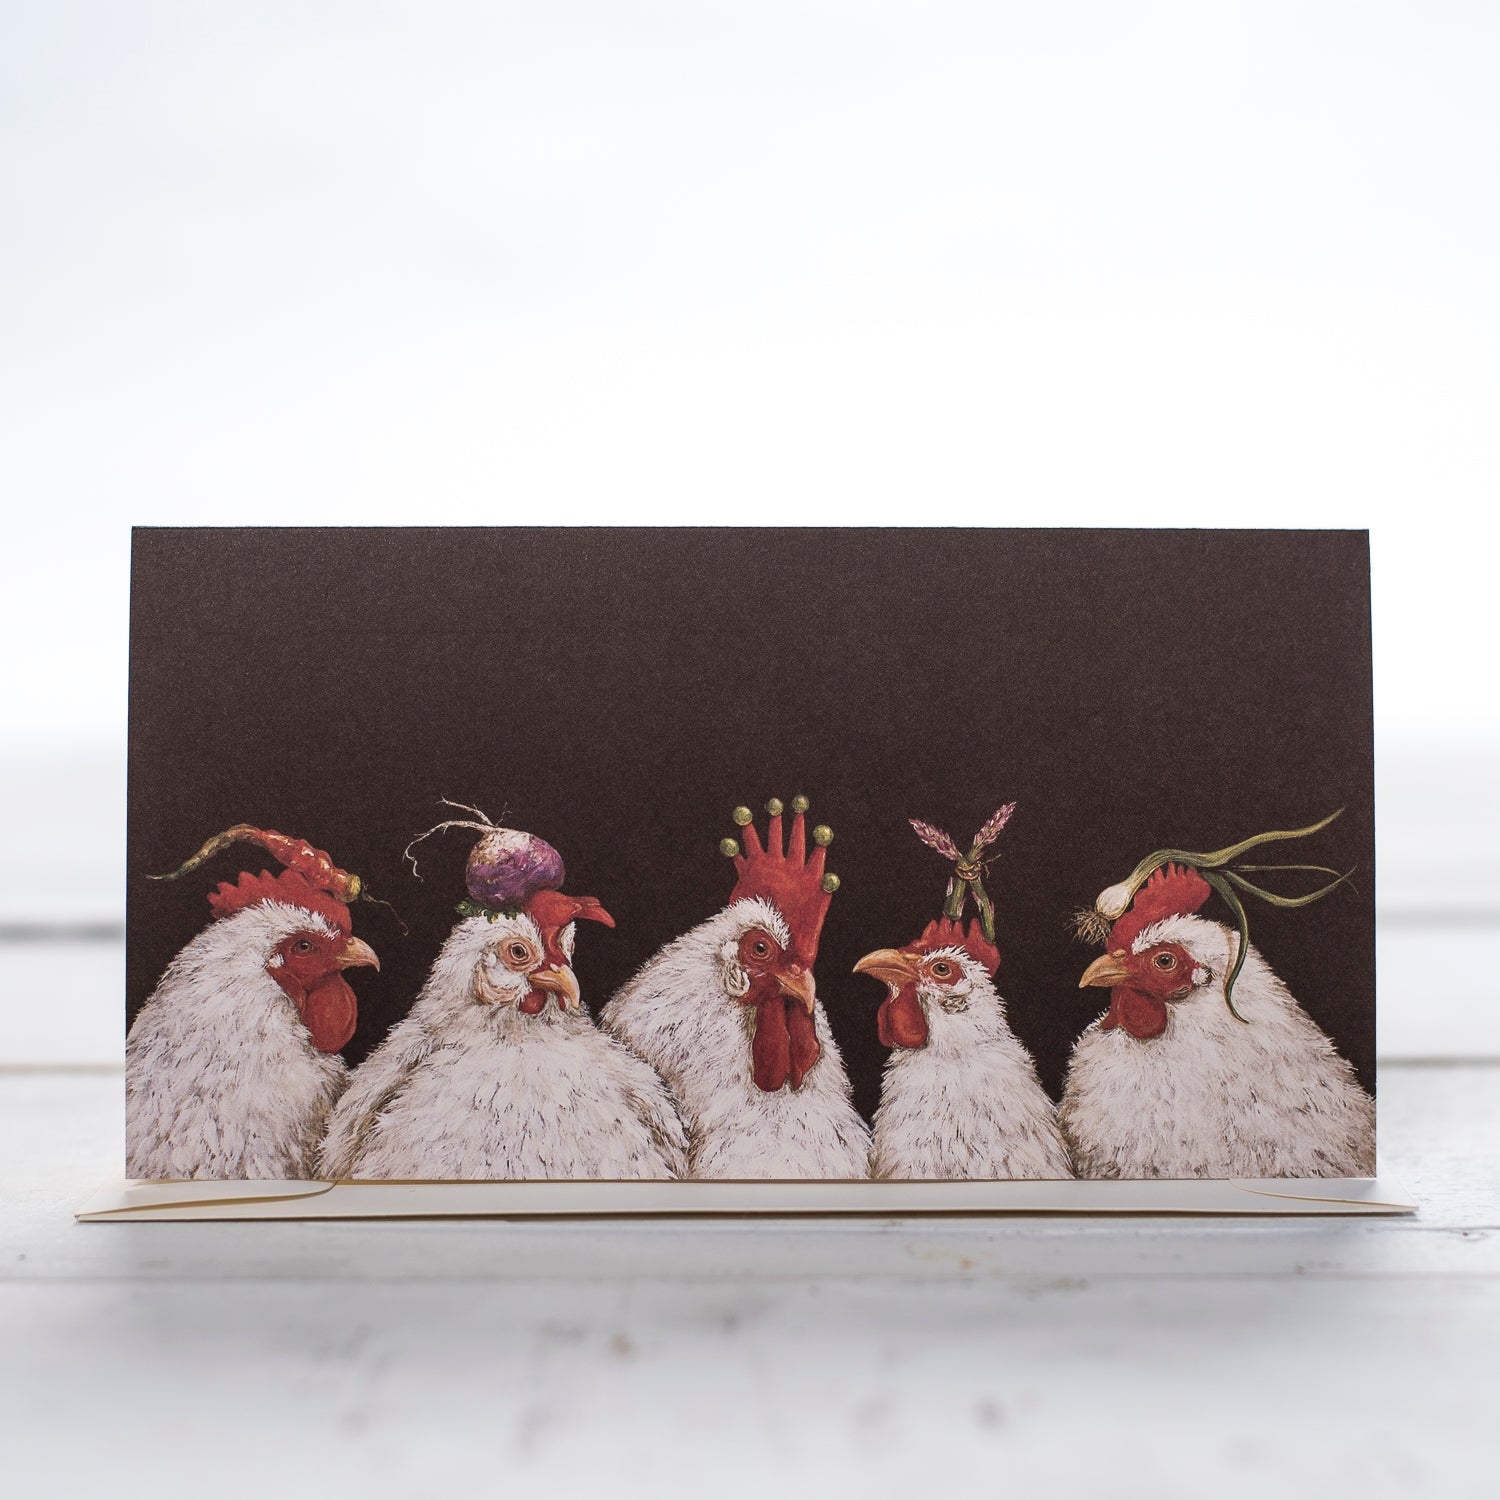 Five white hens with red combs in a row.